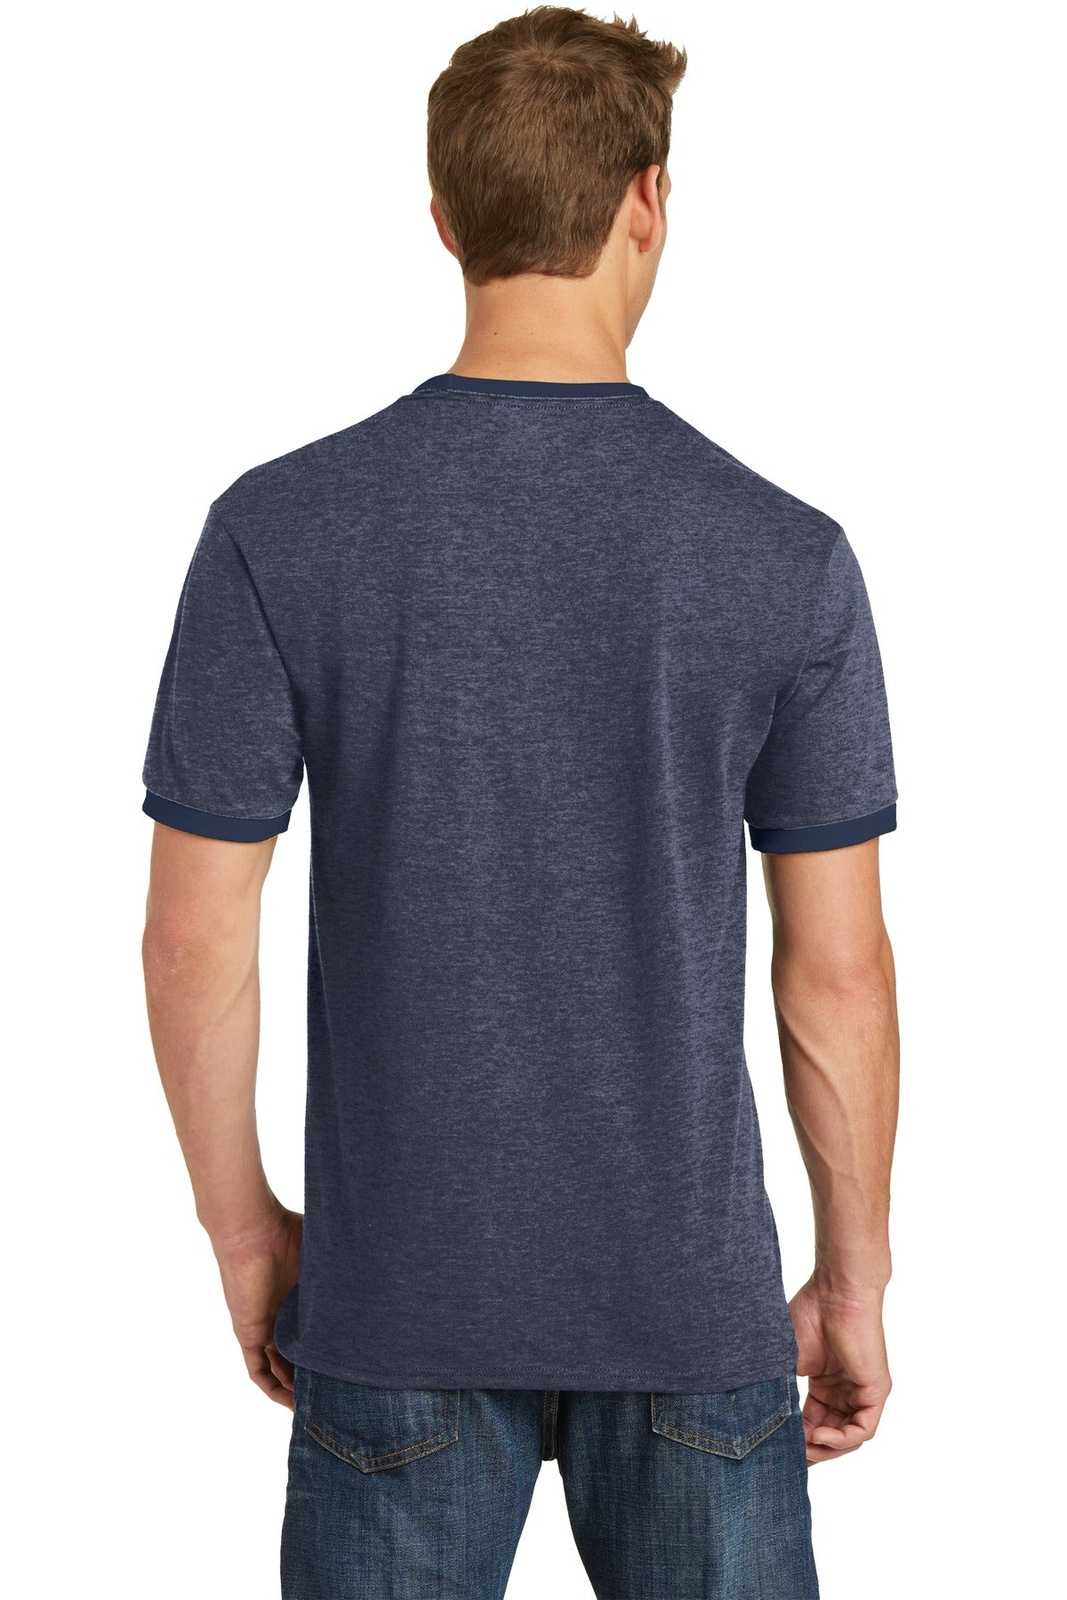 Port & Company PC54R Core Cotton Ringer Tee - Heather Navy Navy - HIT a Double - 1